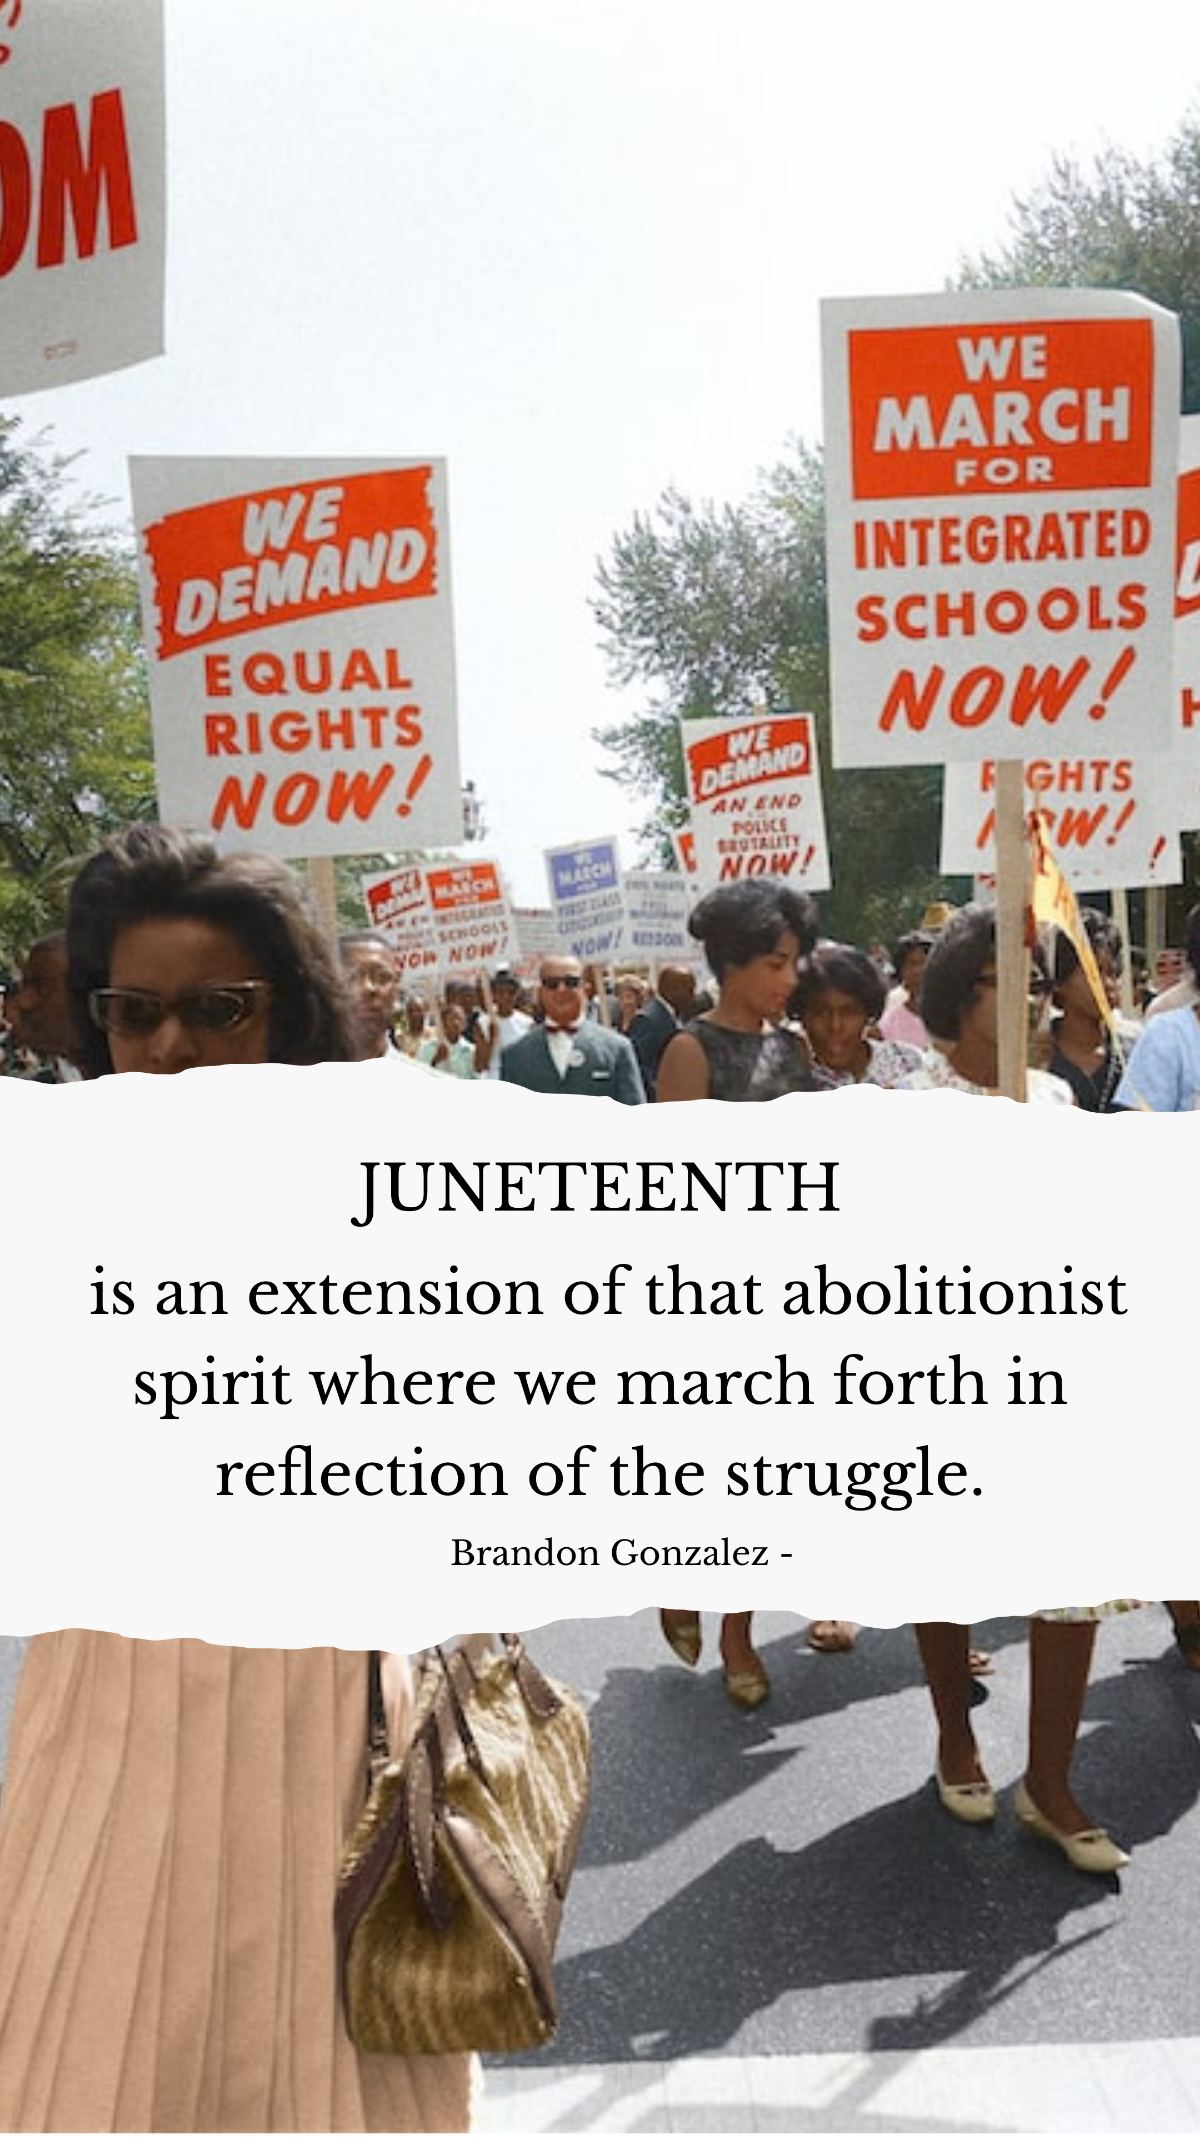 Free Brandon Gonzalez - Juneteenth is an extension of that abolitionist spirit where we march forth in reflection of the struggle. Template